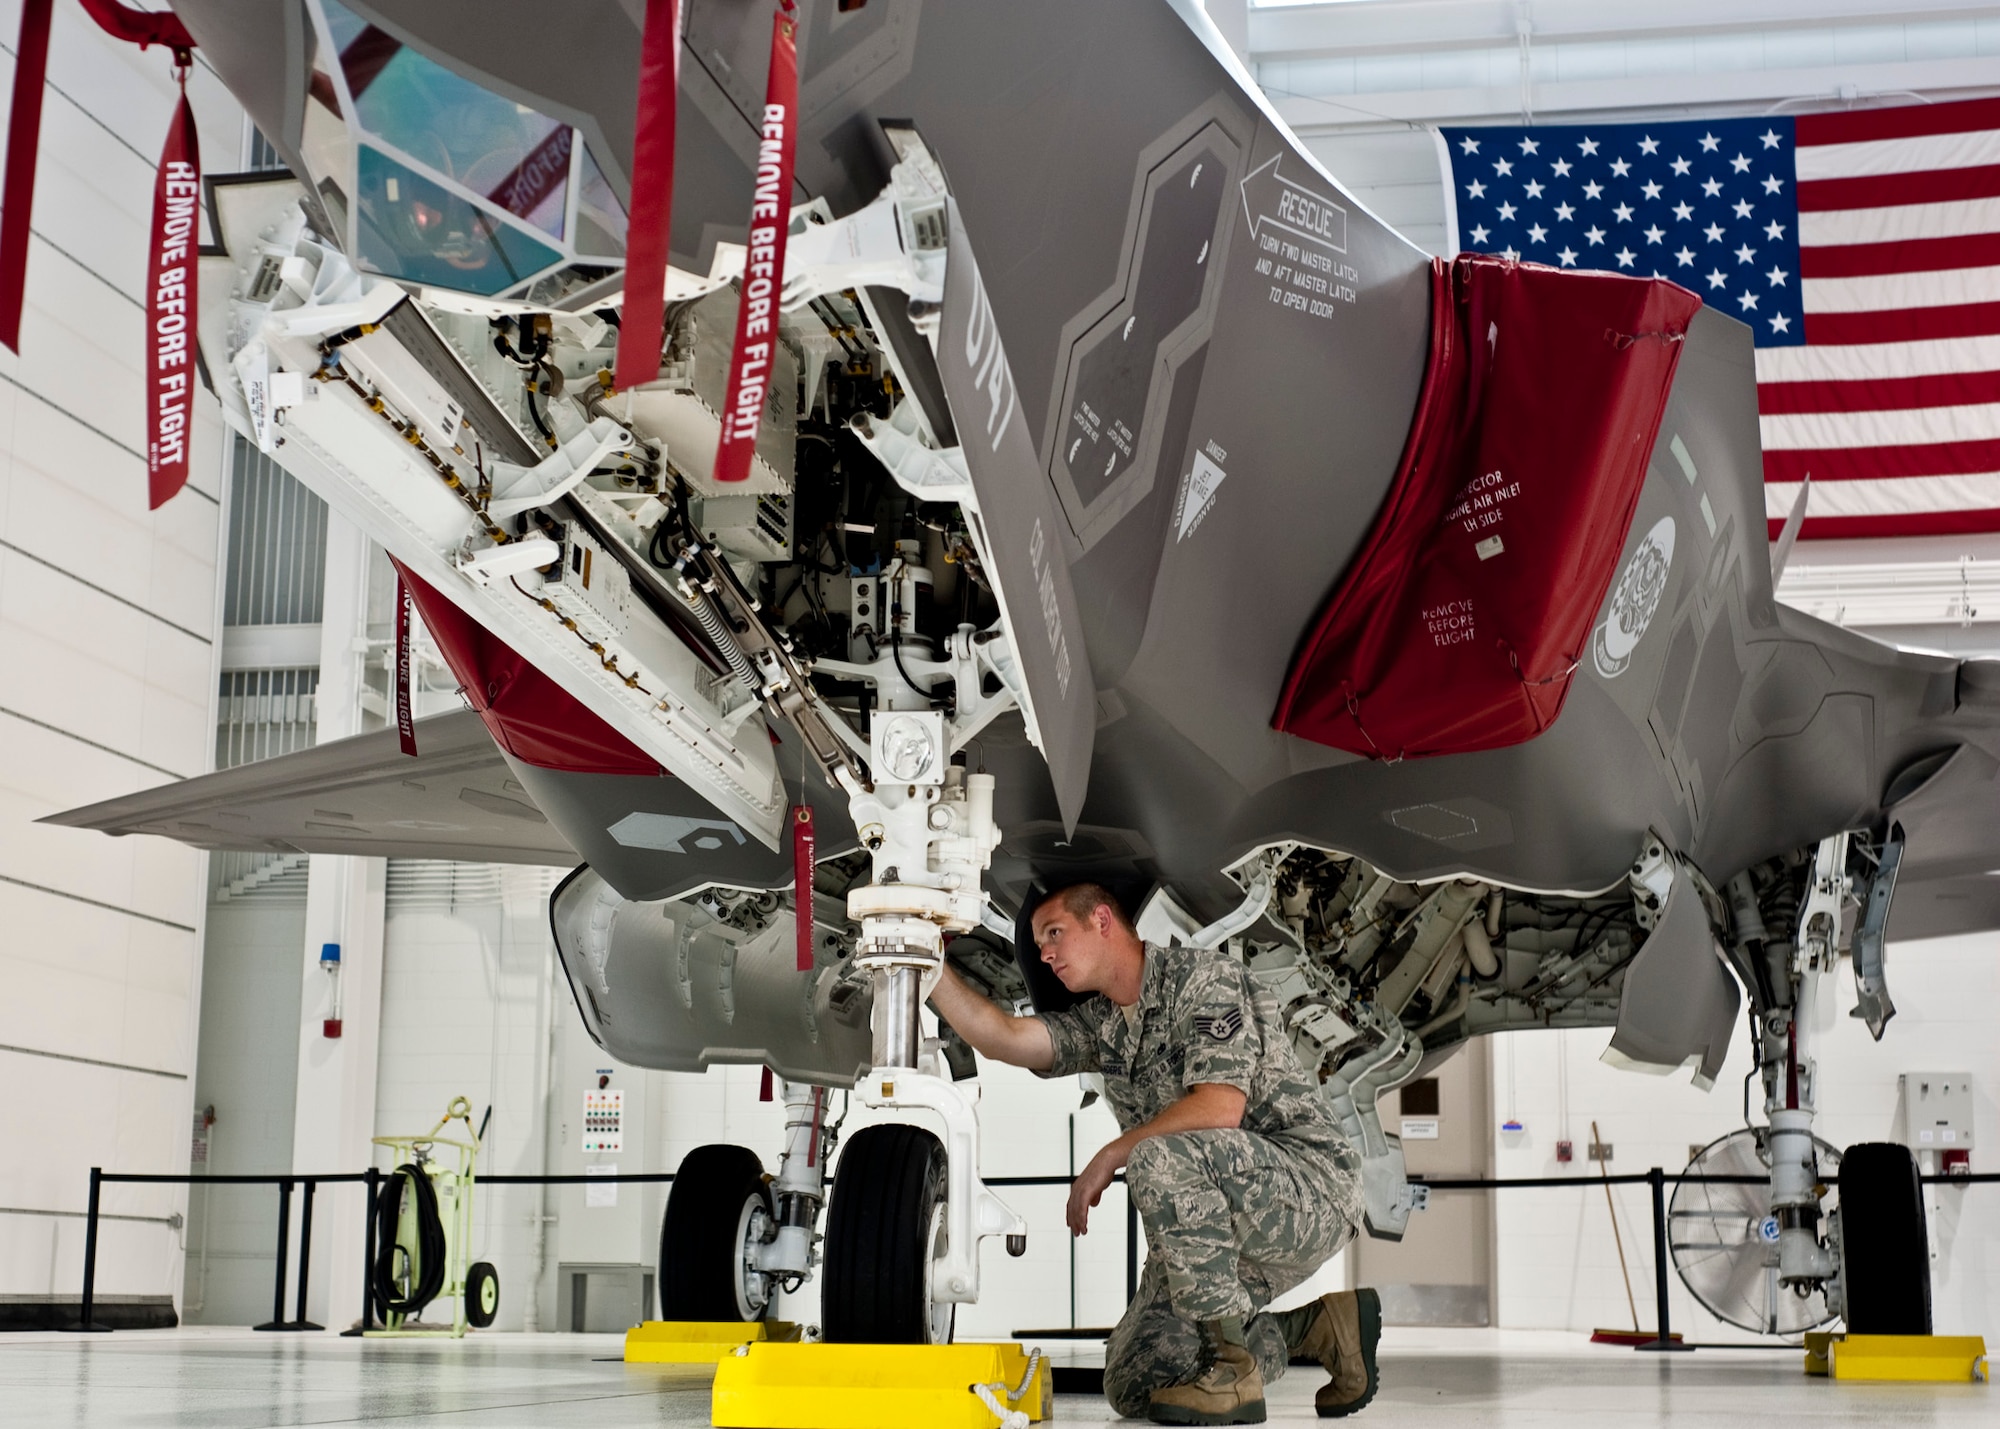 Staff Sgt. Michael Sanders, of the 58th Aircraft Maintenance Squadron checks out the first F-35 Lightning II joint strike fighter at Eglin Air Force Base, Fla.  The first JSF arrival also marked Sanders first time ever recovering an aircraft.  (U.S. Air Force photo/Chrissy Cuttita)